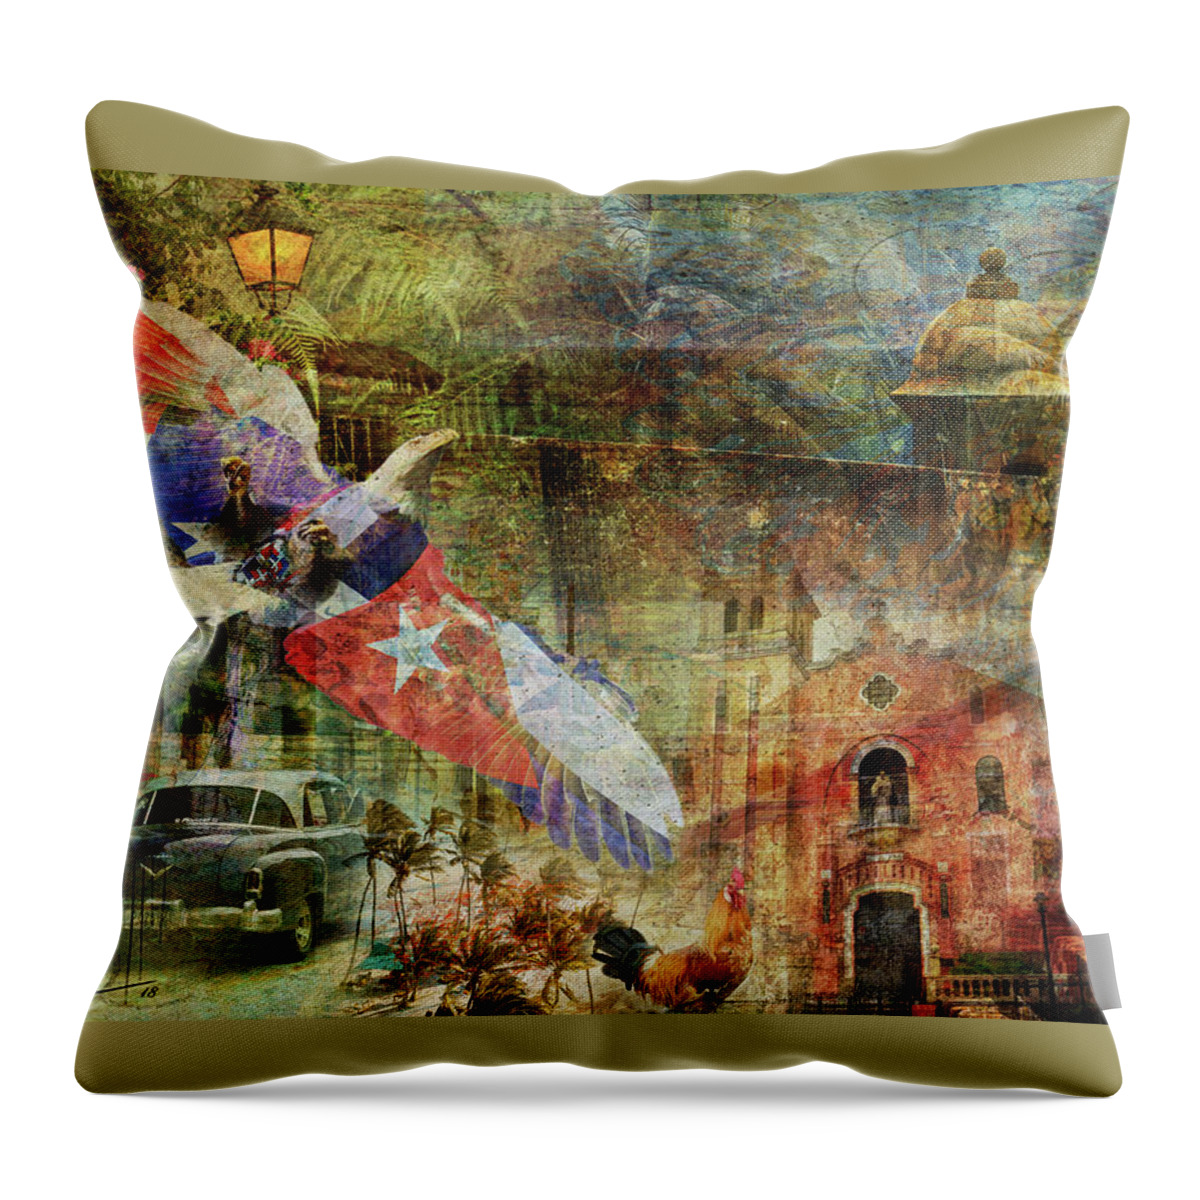 Digital Art Throw Pillow featuring the digital art Latino Roots by Ricardo Dominguez